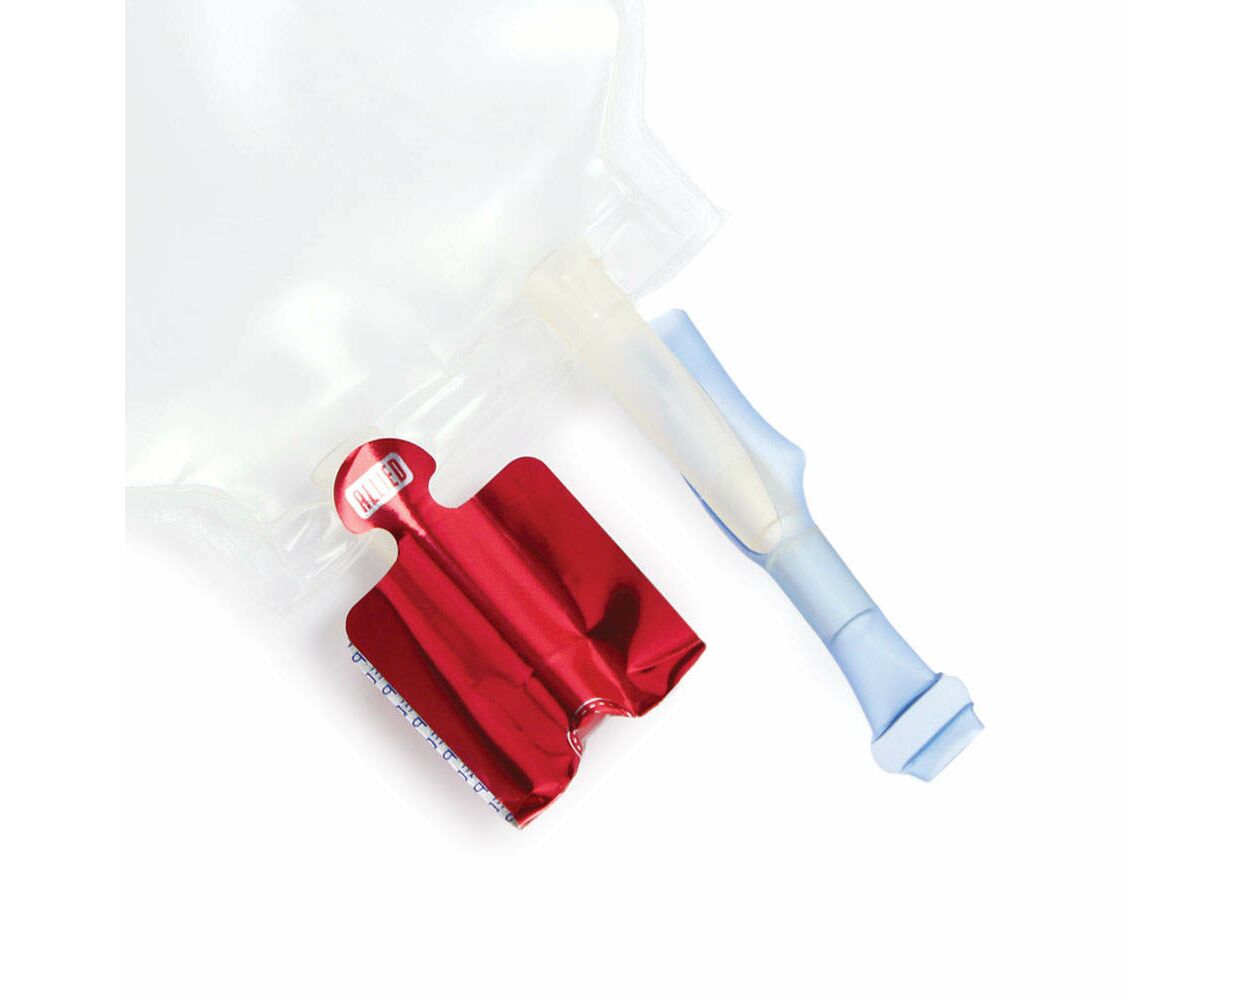 IV Bag Labels Products, Supplies and Equipment